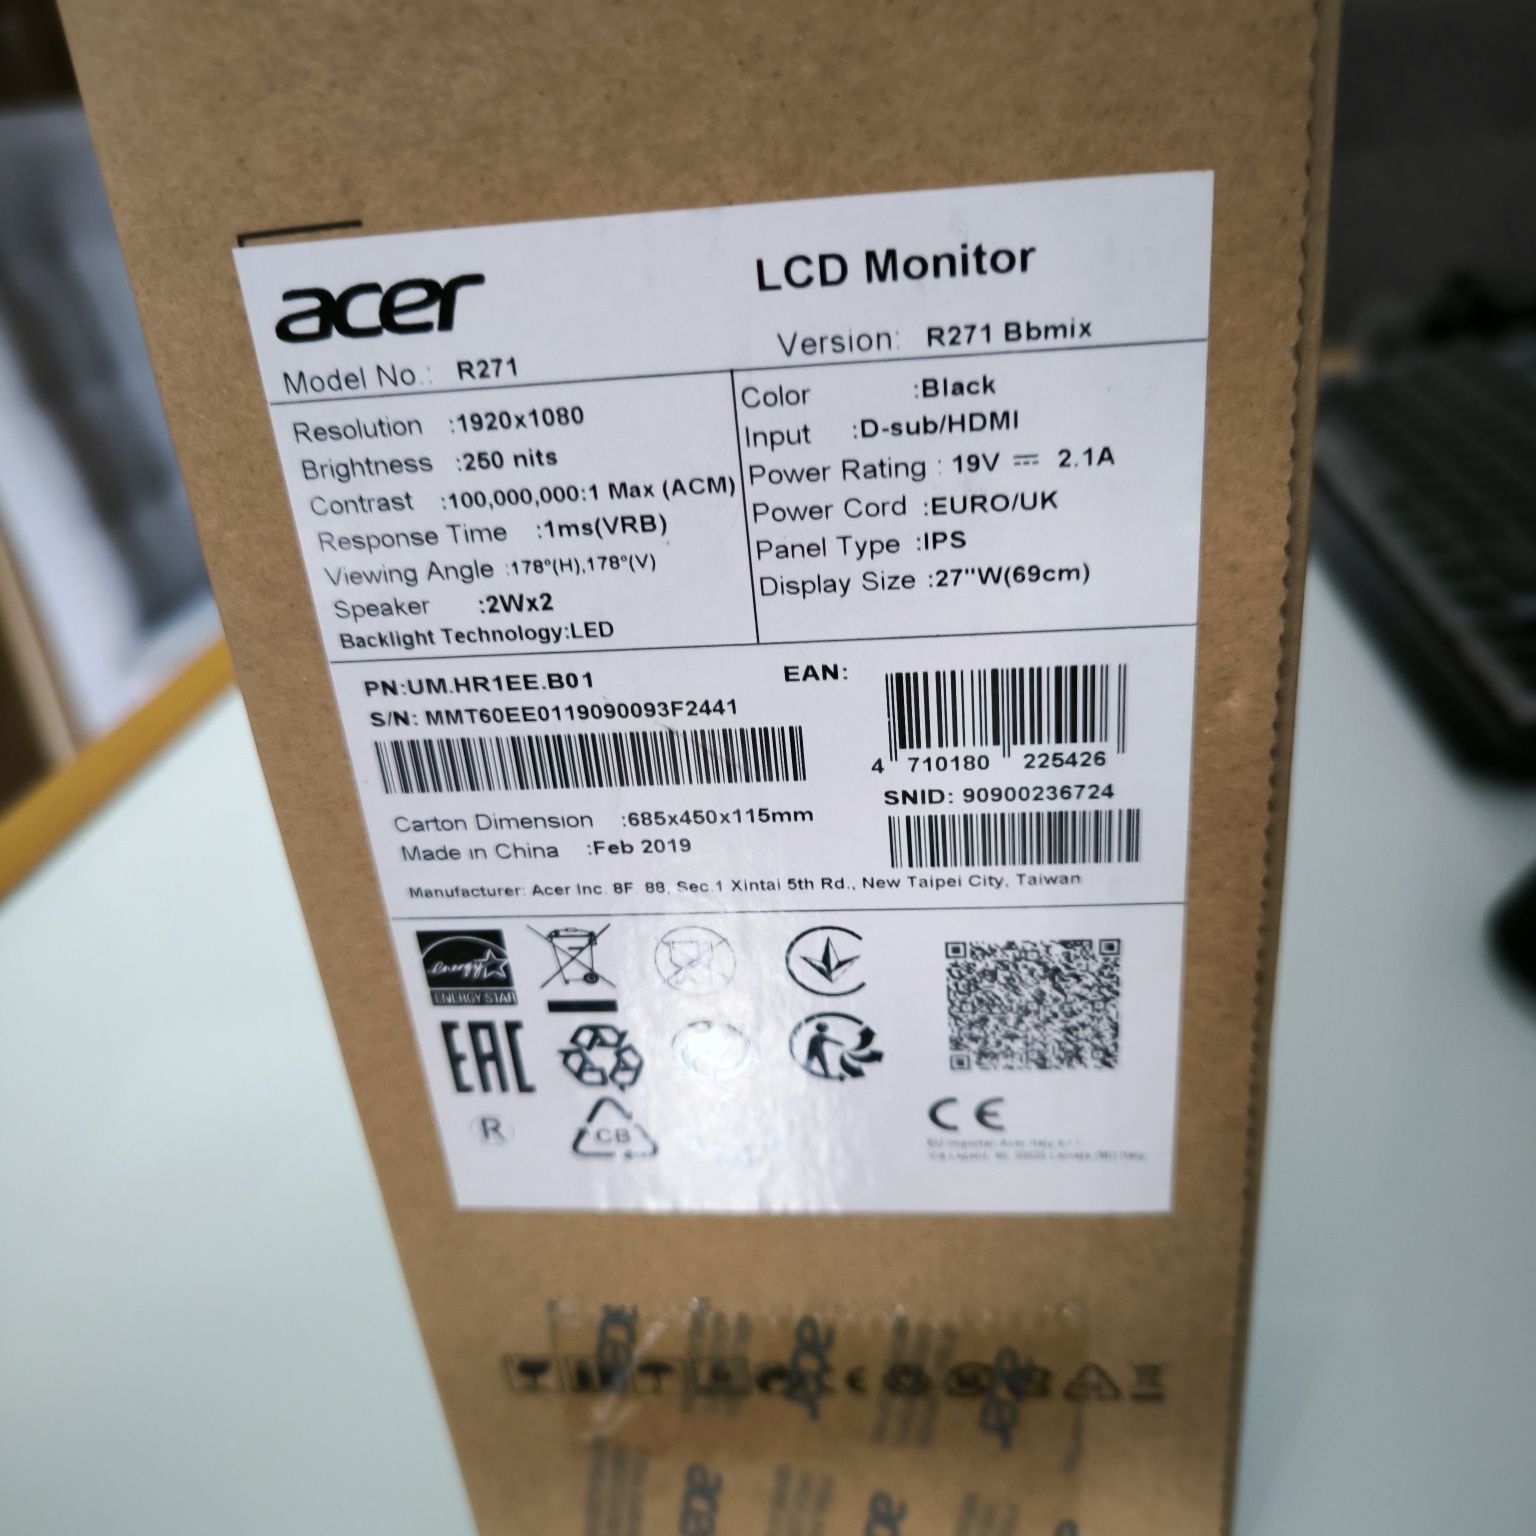 Monitor Acer LCD R271 Bbmix 27 cali